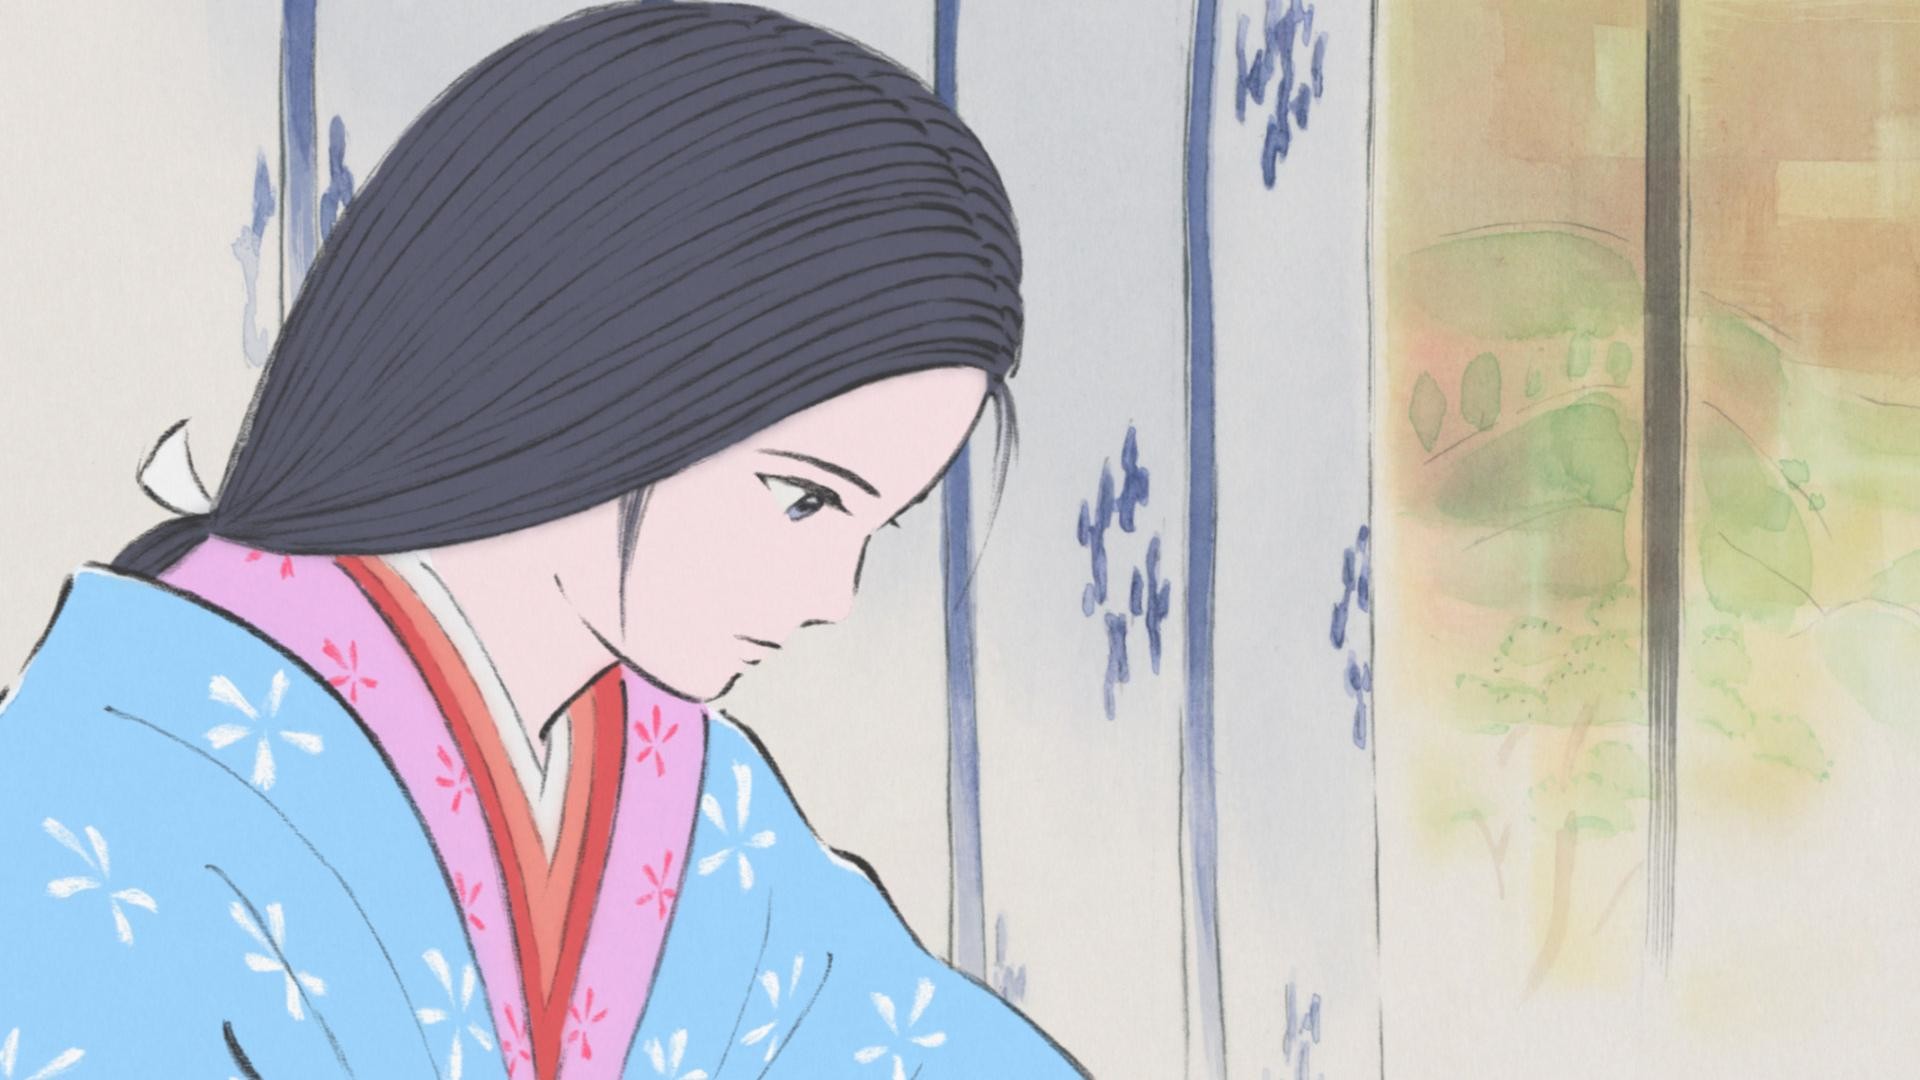 1920x1080 The Tale Of The Princess Kaguya new wallpapers